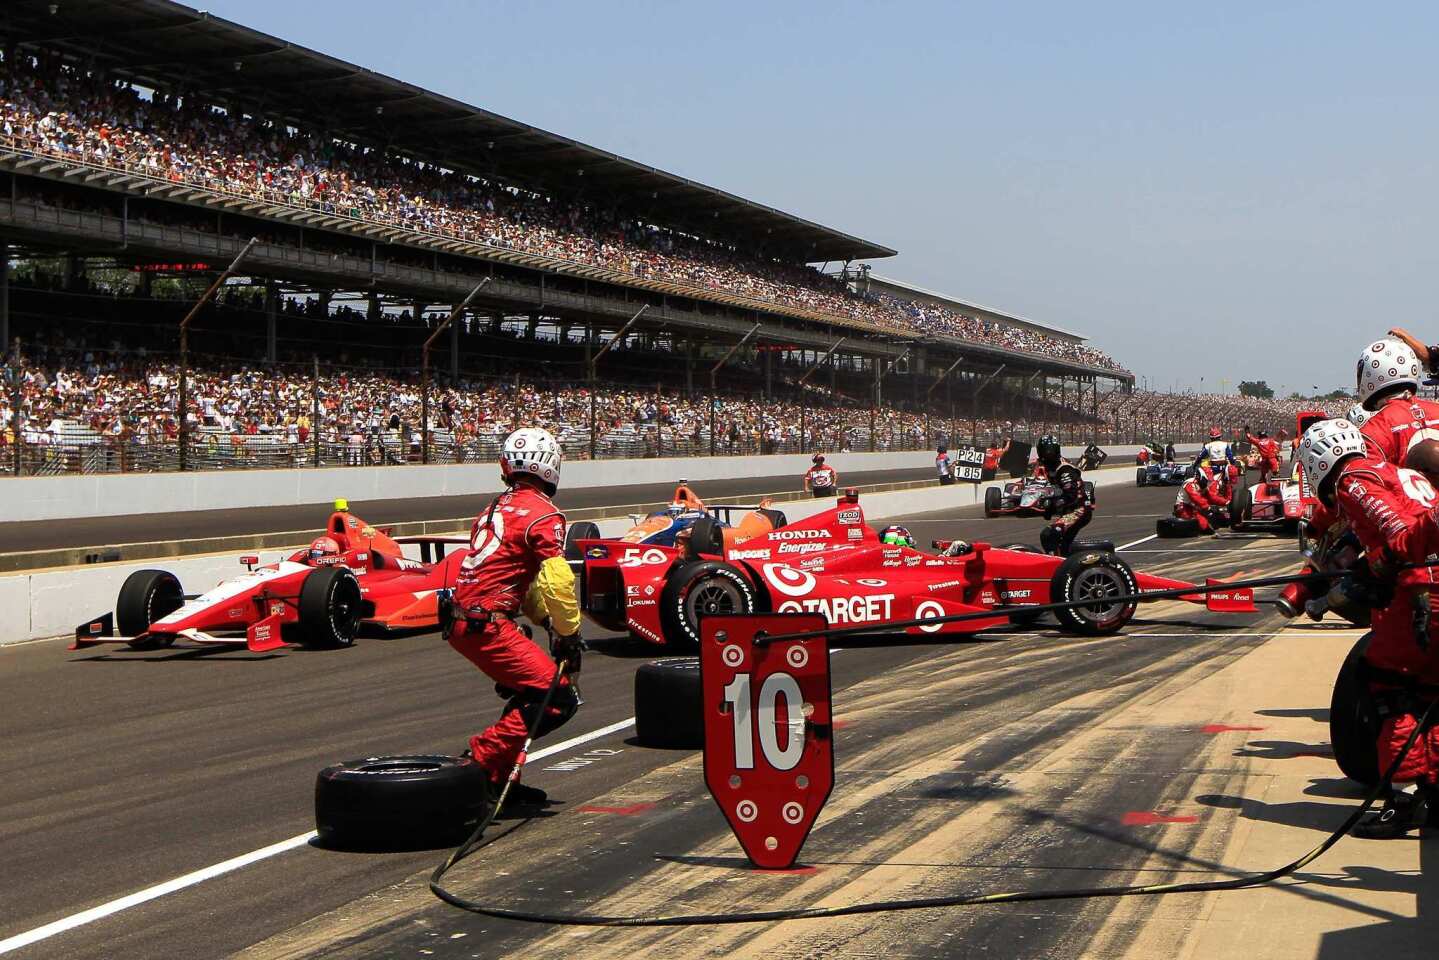 The car of Dario Franchitti is spun on pit road by E.J. Viso during a stop on Sunday in the 96th Indianapolis 500.